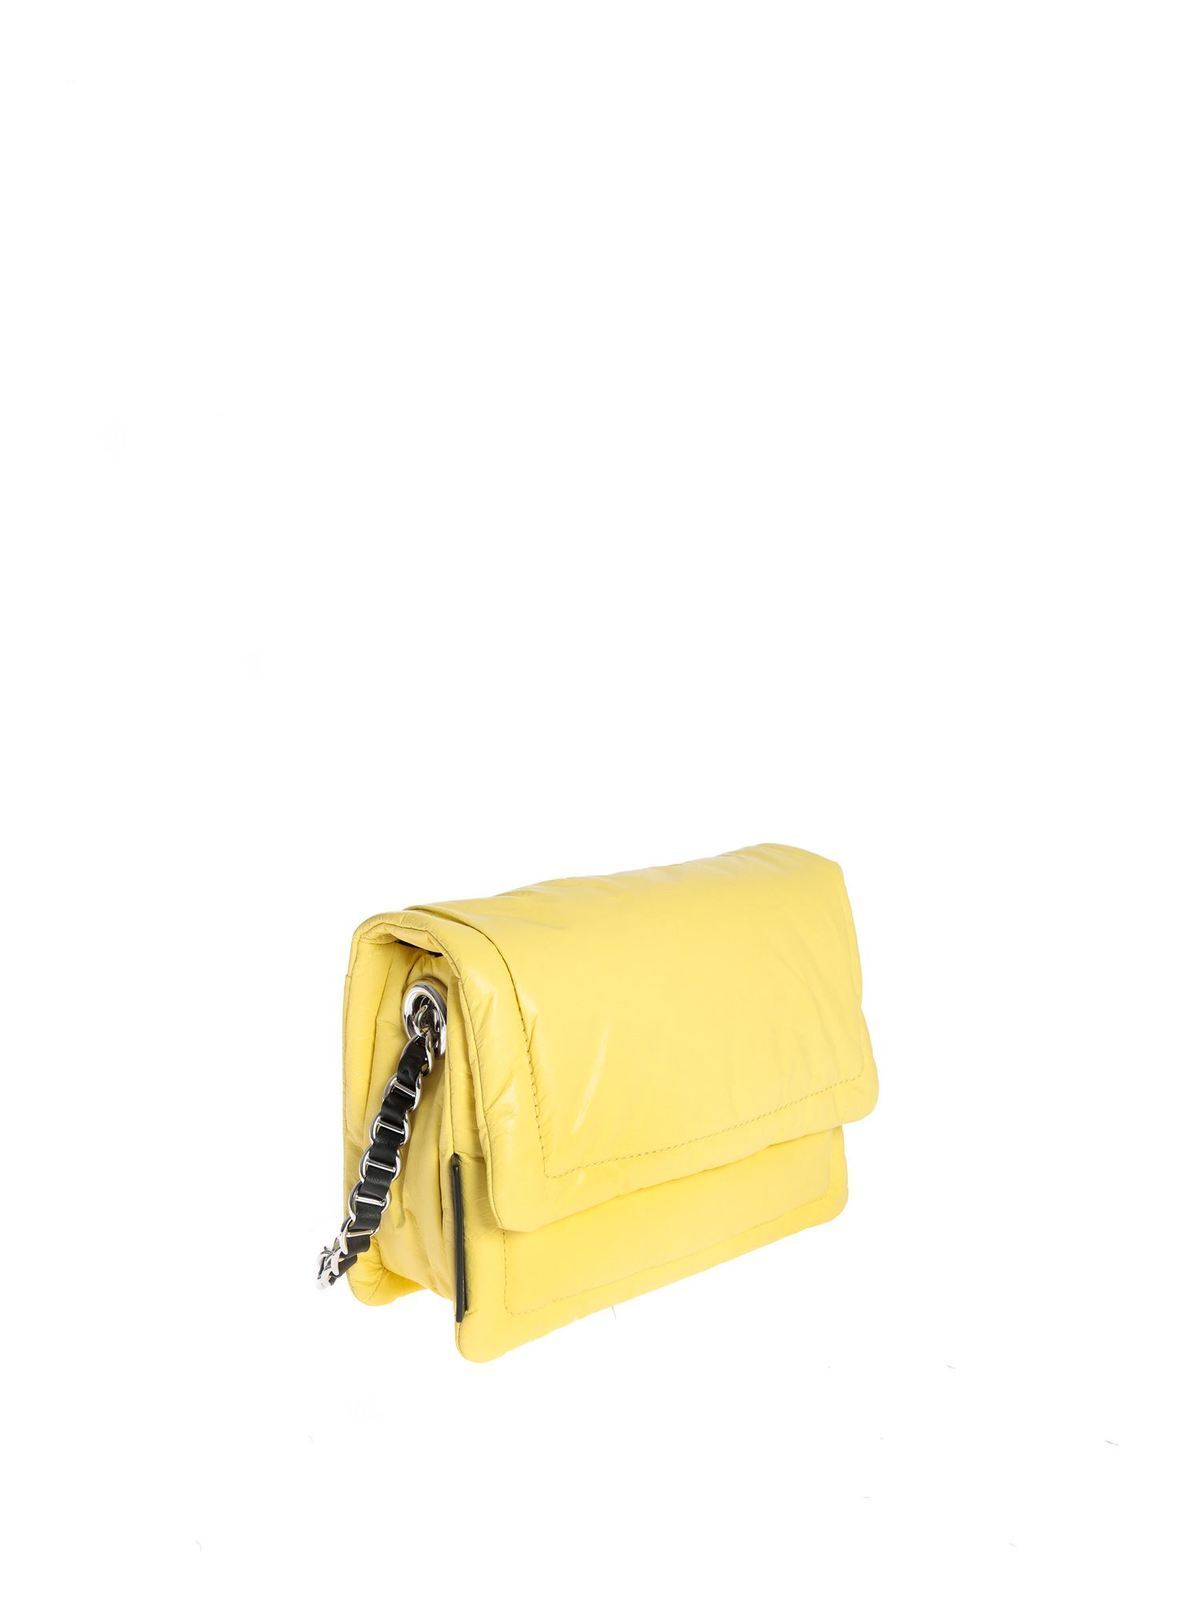 Cross body bags Marc Jacobs - The Pillow bag in Lime color